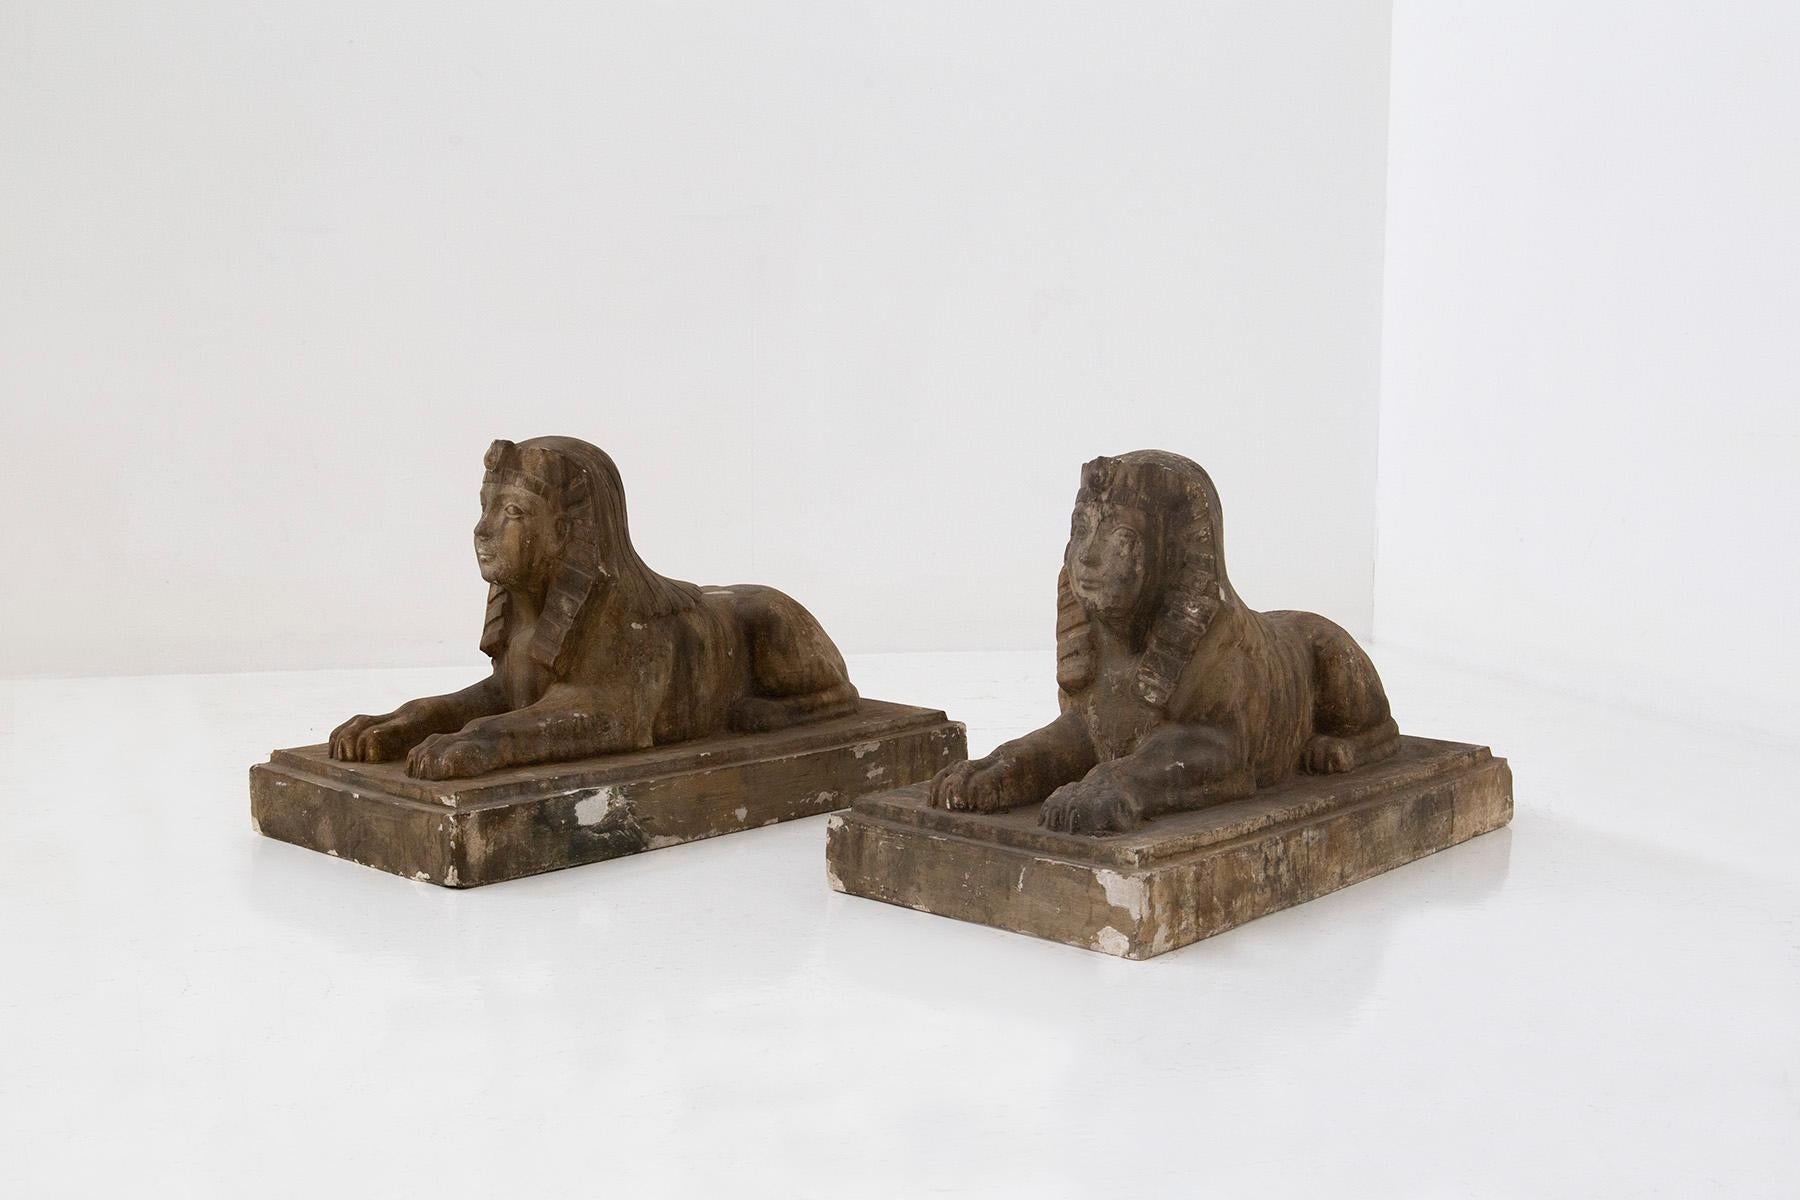 Discover the epitome of elegance with this exquisite pair of Egyptian sphinx statues. Crafted with meticulous attention to detail, these magnificent sculptures are made of scaiola plaster and adorned with a captivating gold finish. Dating back to